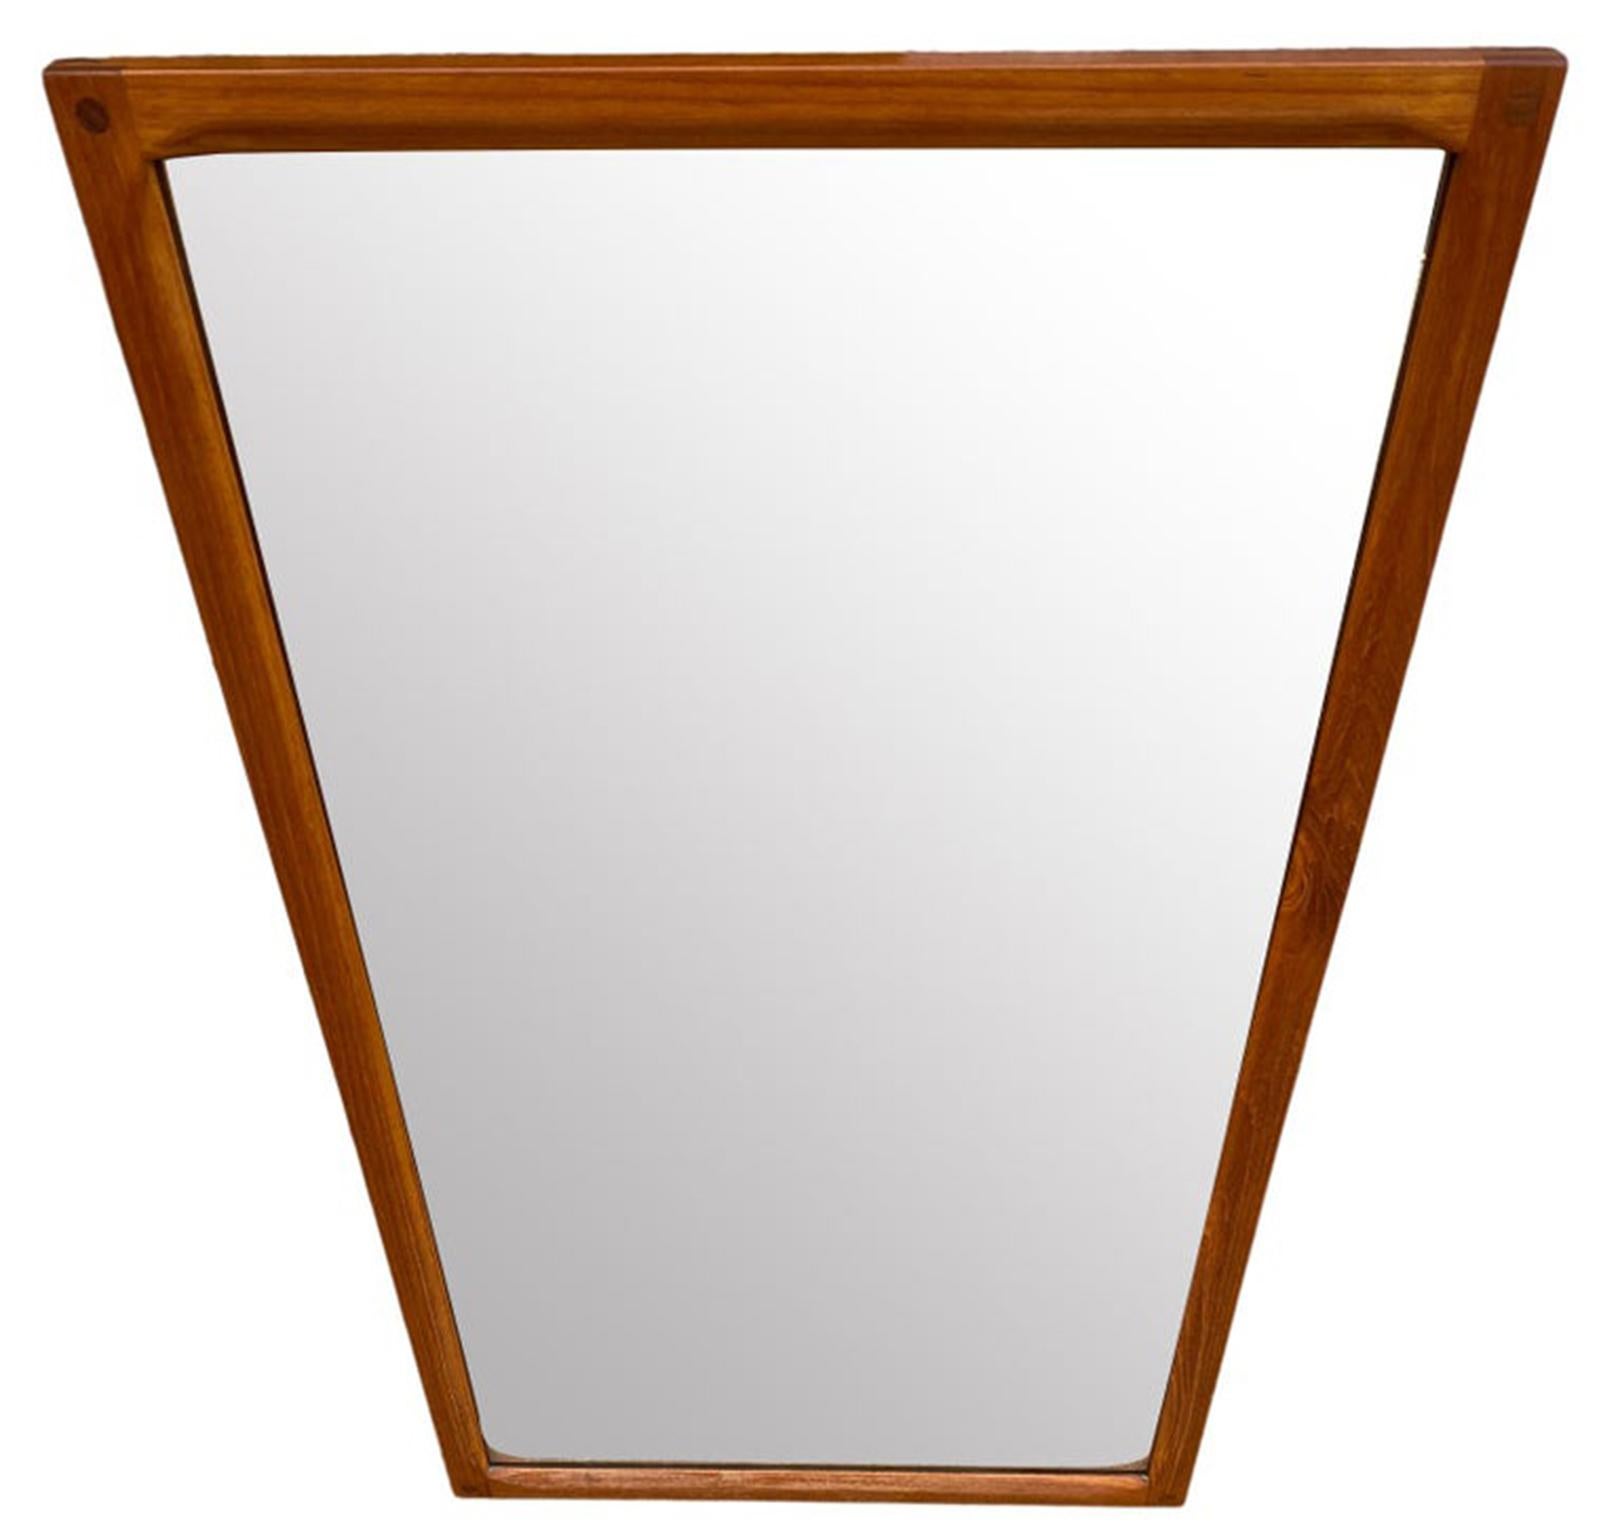 Wonderful Scandinavian Danish modern teak mirror. Very intricately designed with tight joinery featuring a circular inset within the frame. Designed by Kai Kristiansen and manufactured by Aksel Kjersgaard. Appears brand new. Model number 166 K.